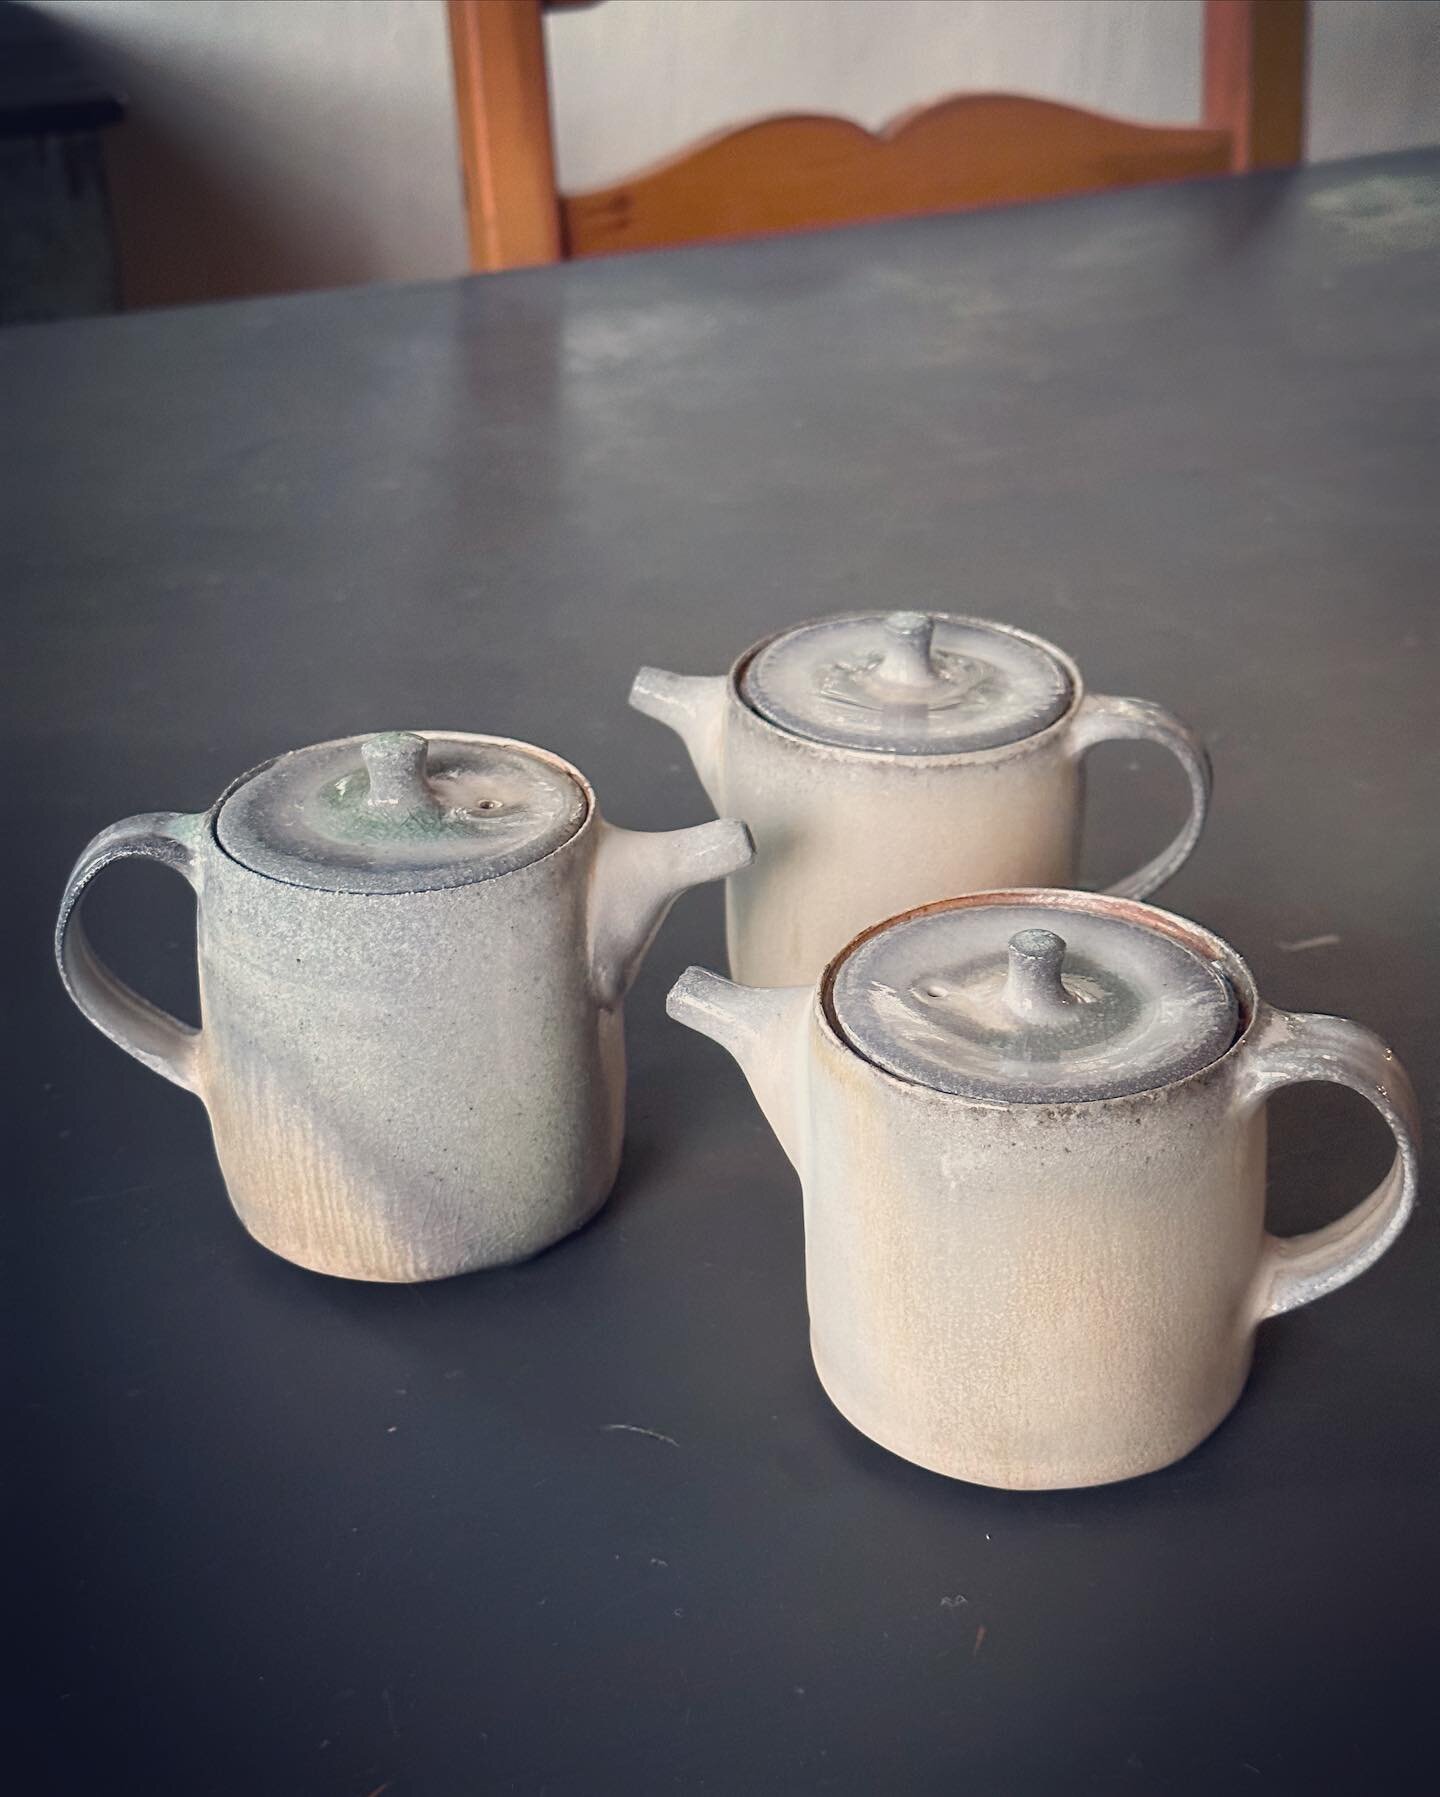 Unloaded the soda kiln after a long delay due to the storm damage to the kiln and repairs, etc. 
🙏Thanks to @takaunnoceramics and @thepottersstudio 
I had a chance to try a new firing style this time, and I  learned a lot. Now I have more to study a